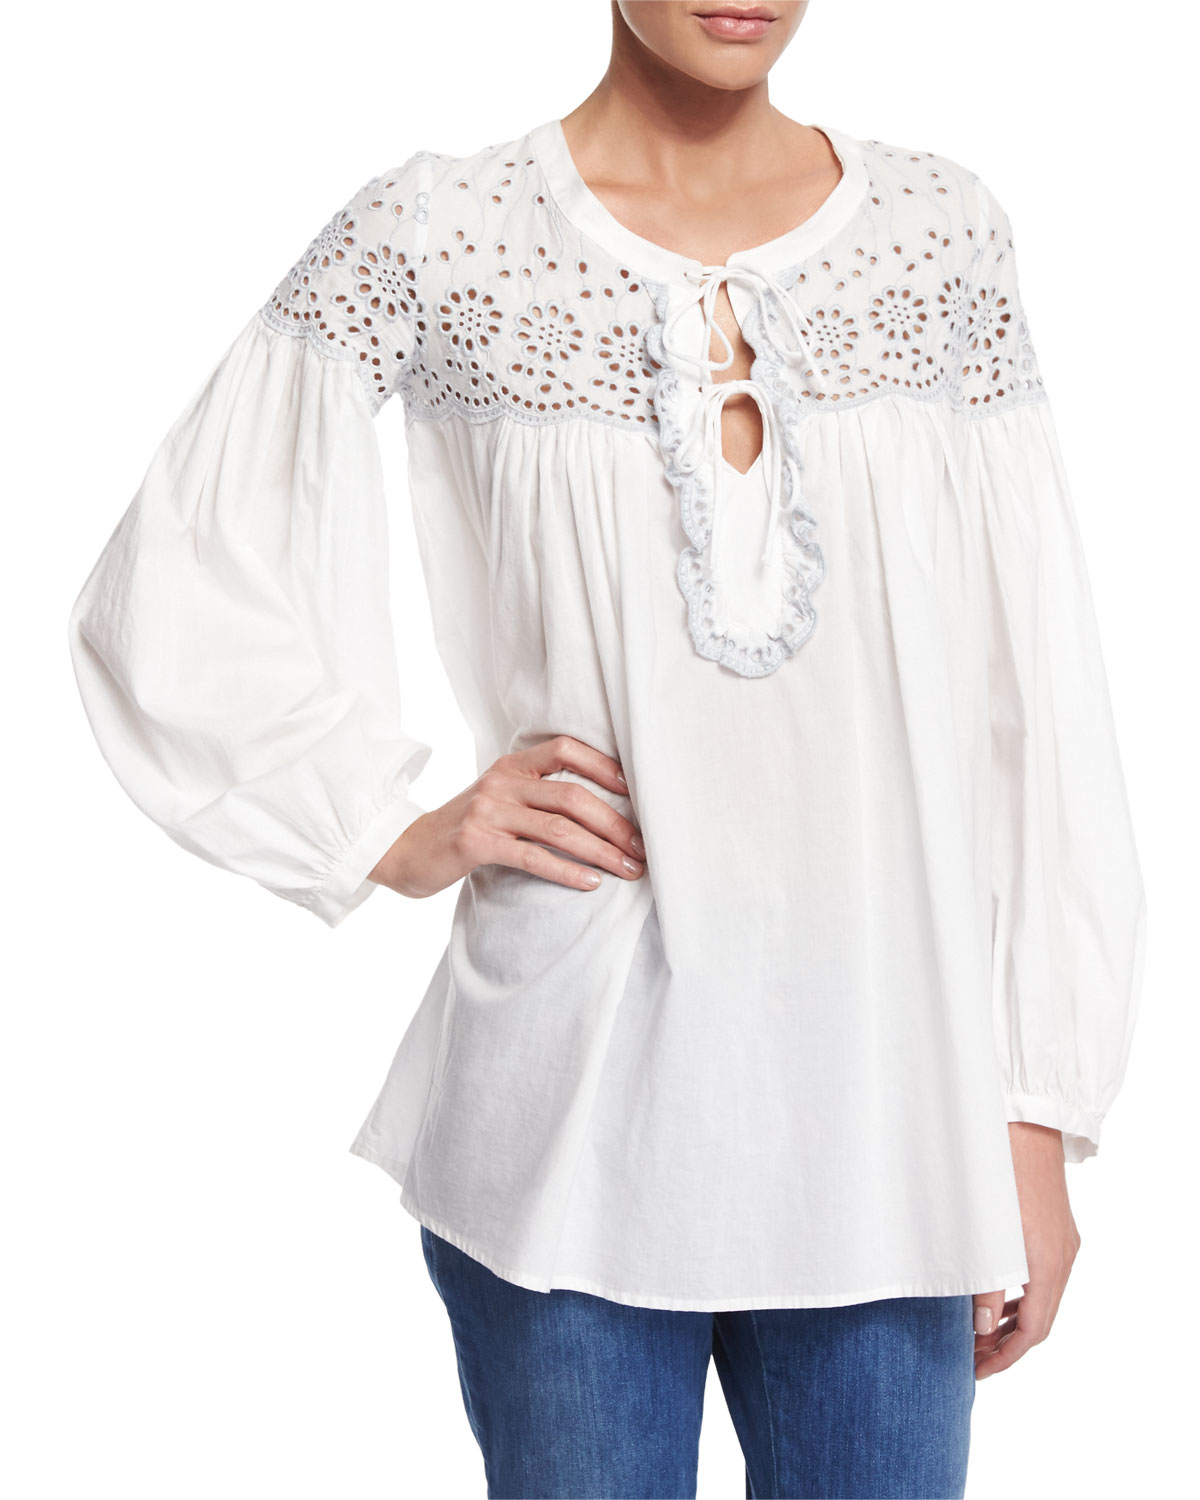 See by chloé Long-sleeve Eyelet Tie-front Blouse in White | Lyst